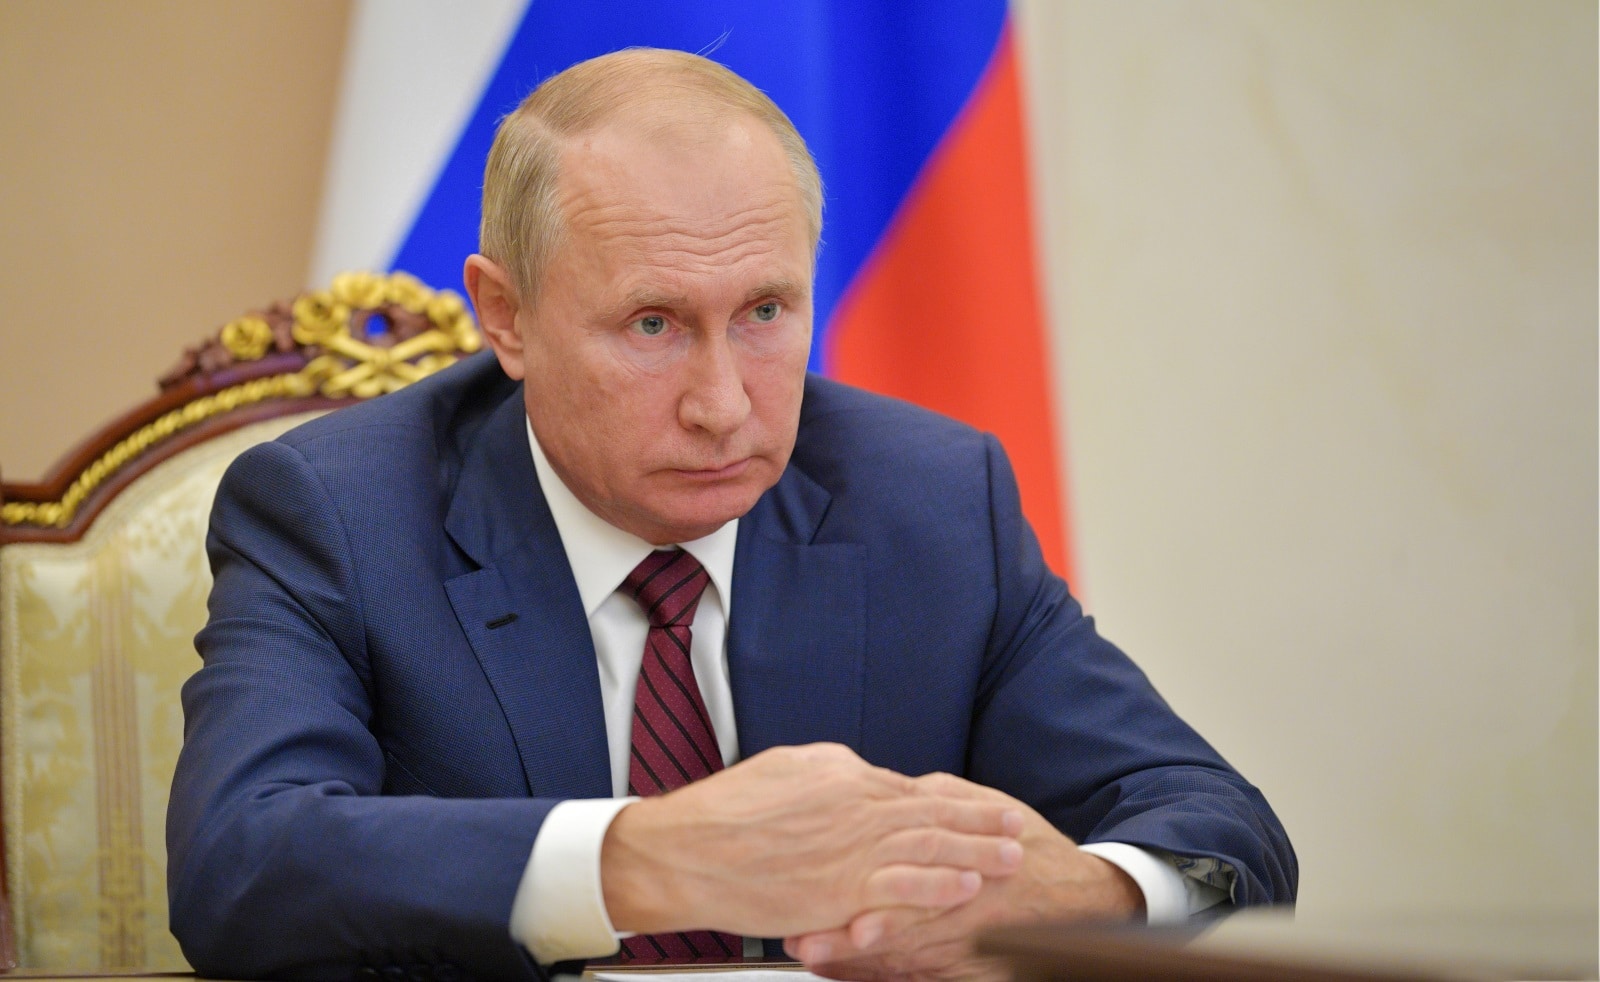 Image Credit: Shutterstock / Aynur Mammadov <p><span>These members of the council are essentially representatives of Putin’s government, which is often characterized by the president’s strict anti-LGBTQ+ agenda.</span></p>